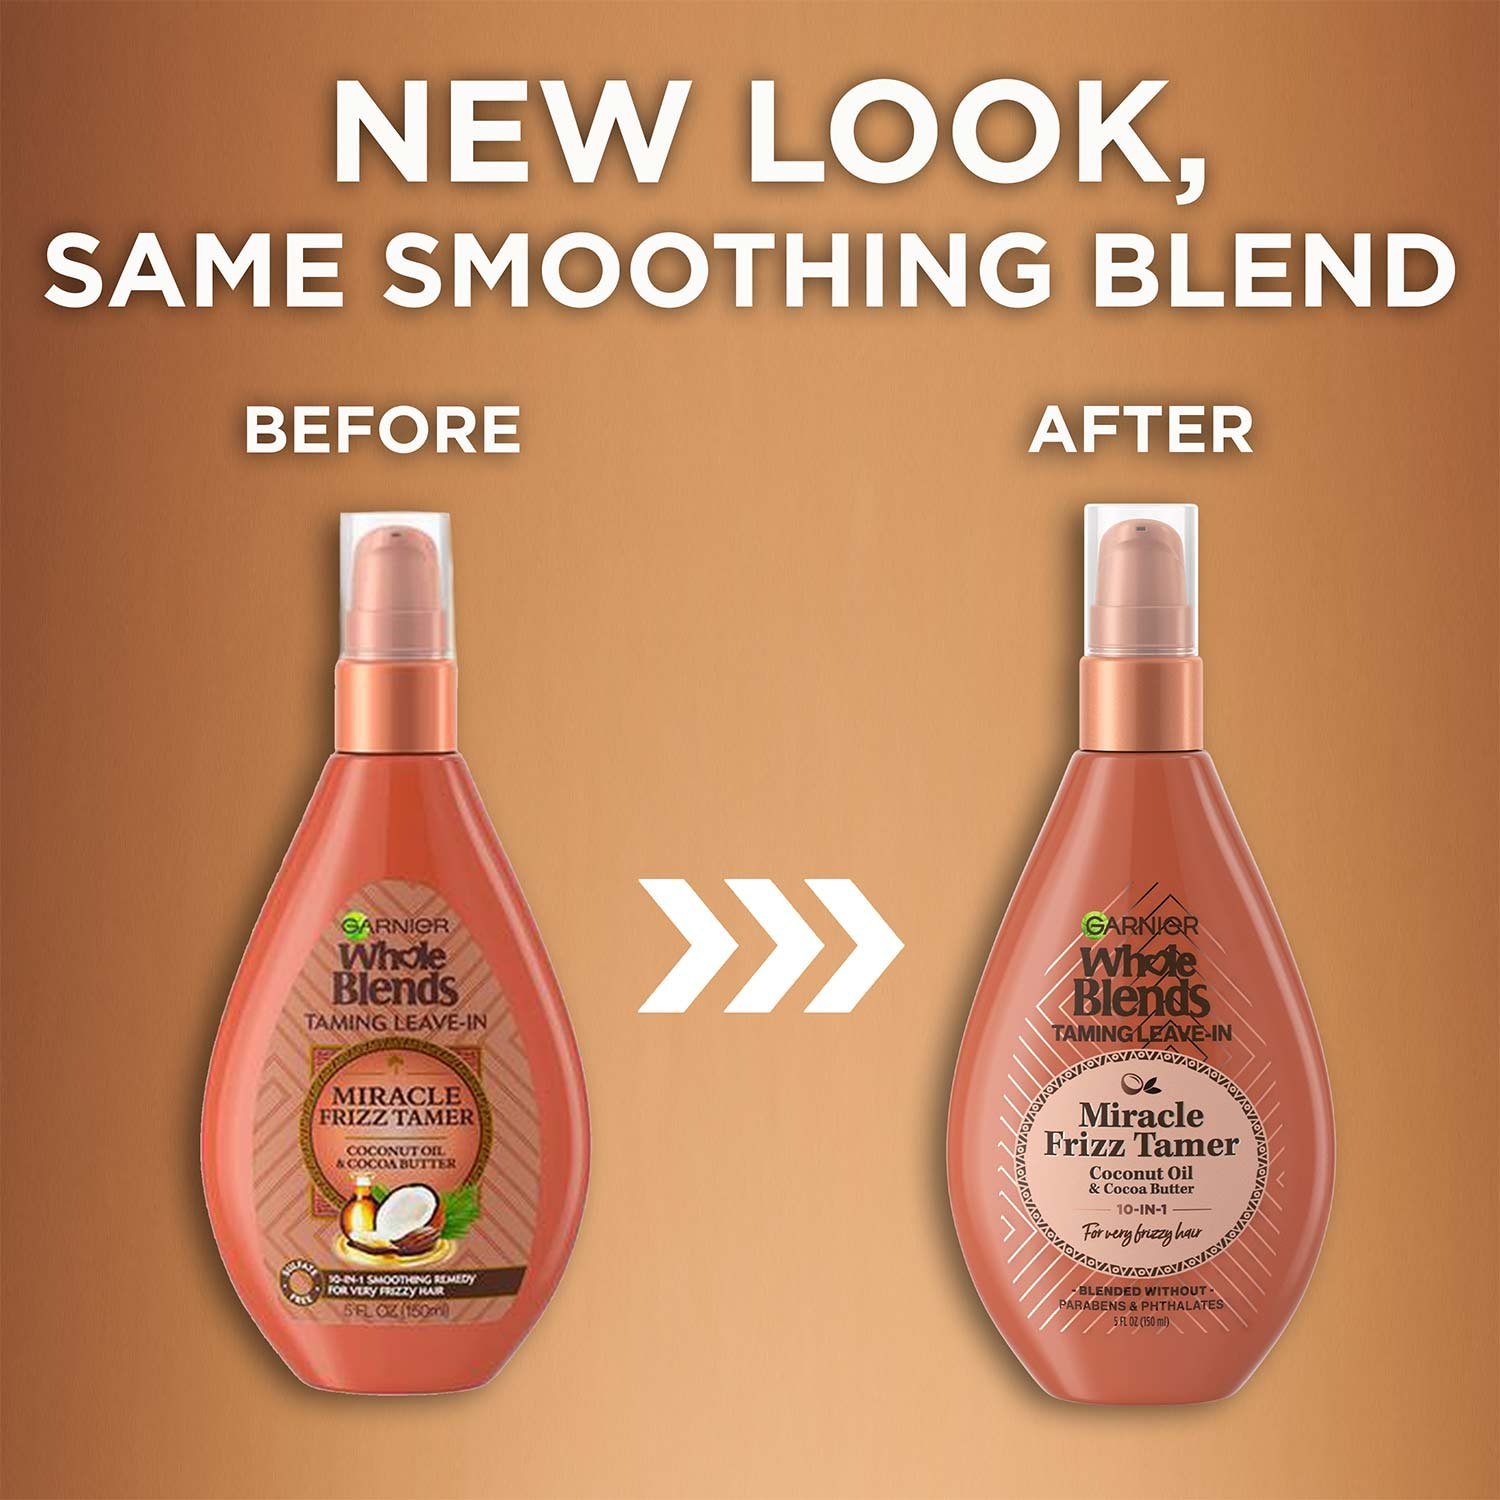 Whole Blends Coco Cocoa frizz tamer new look, same blend